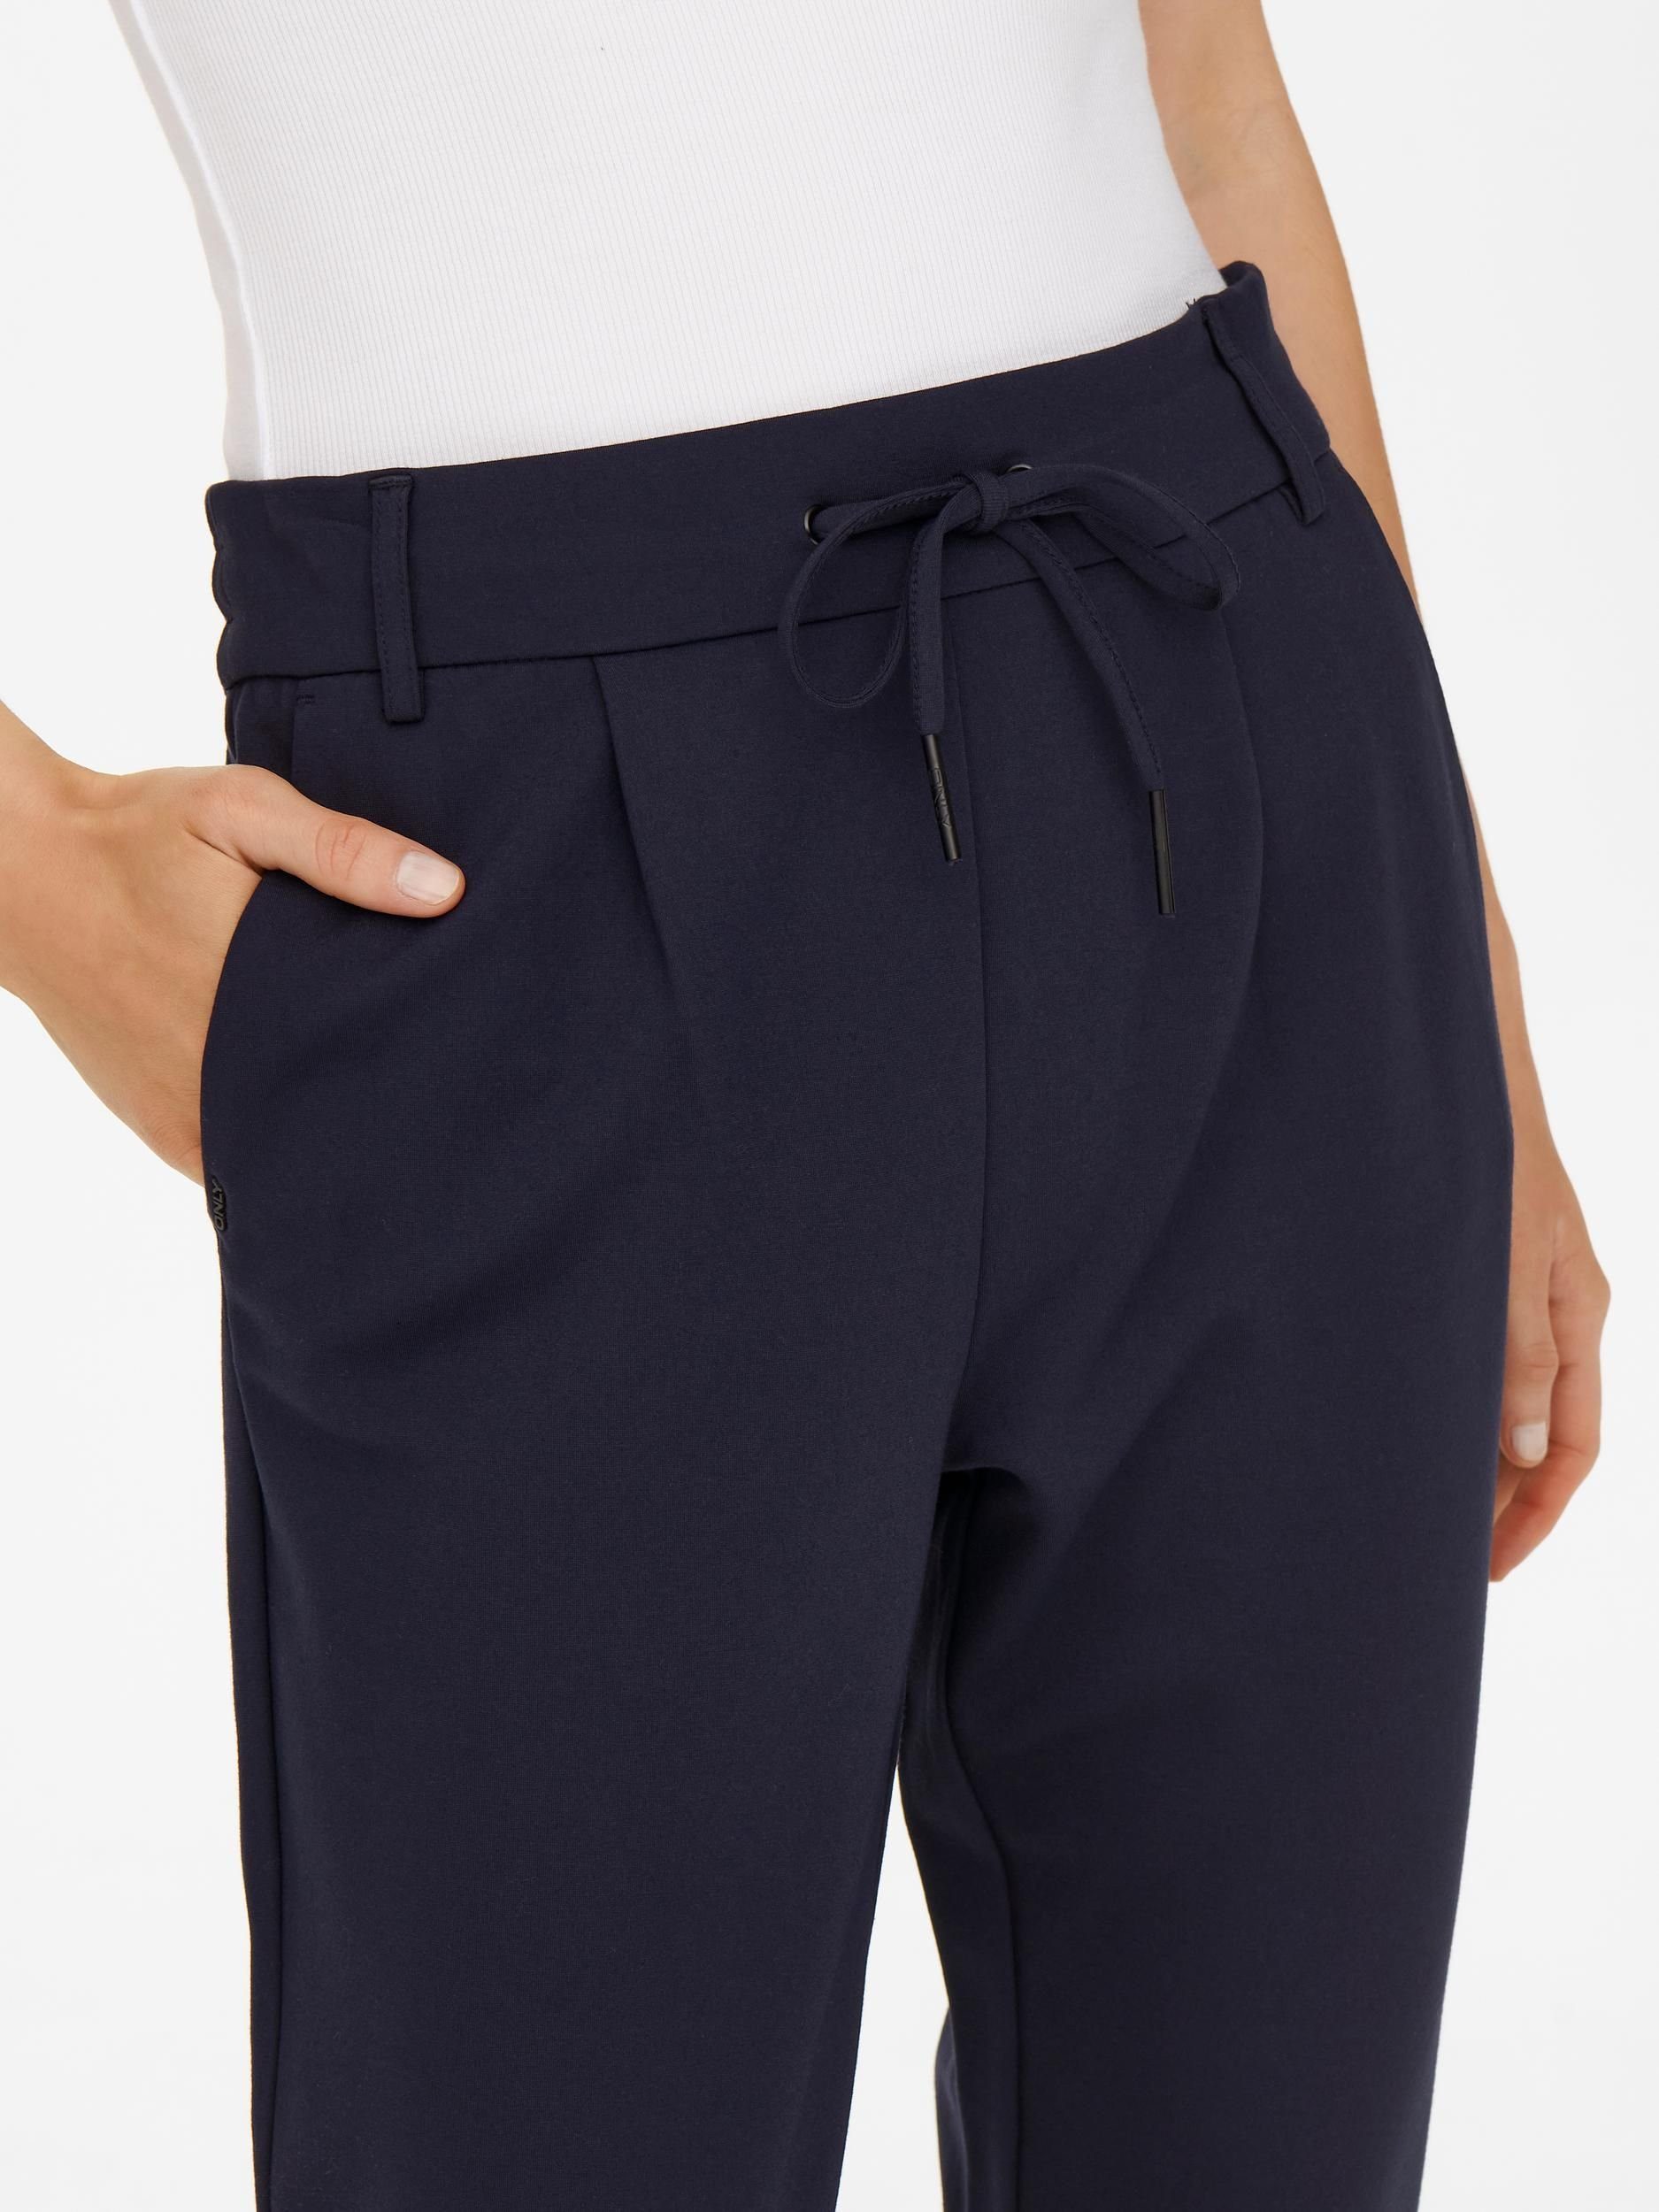 ONLY sky Pants night Jogger